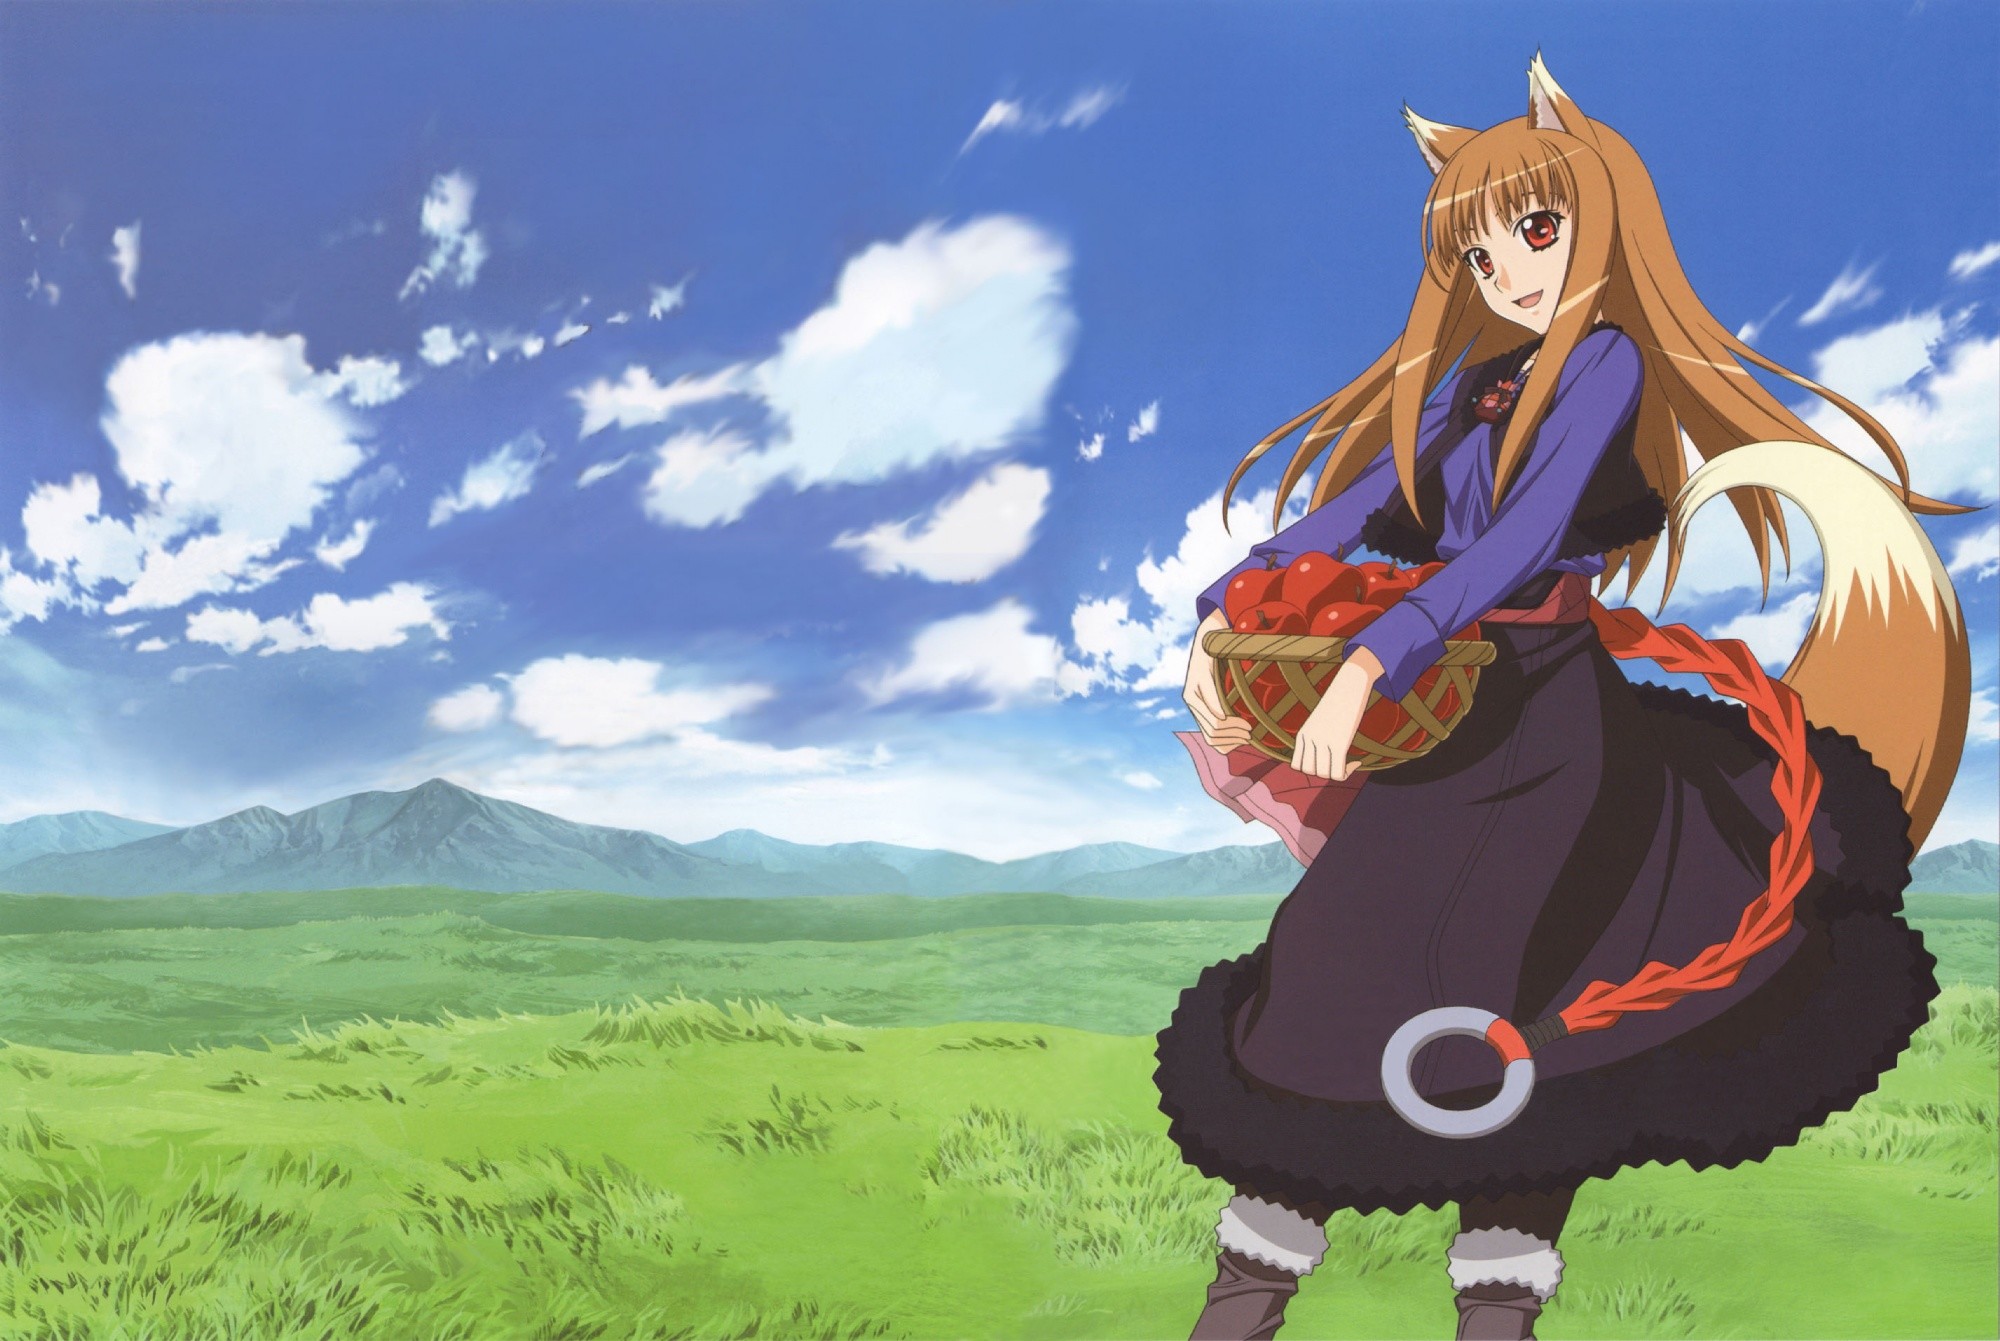 Hd Wallpaper - Spice And Wolf - HD Wallpaper 